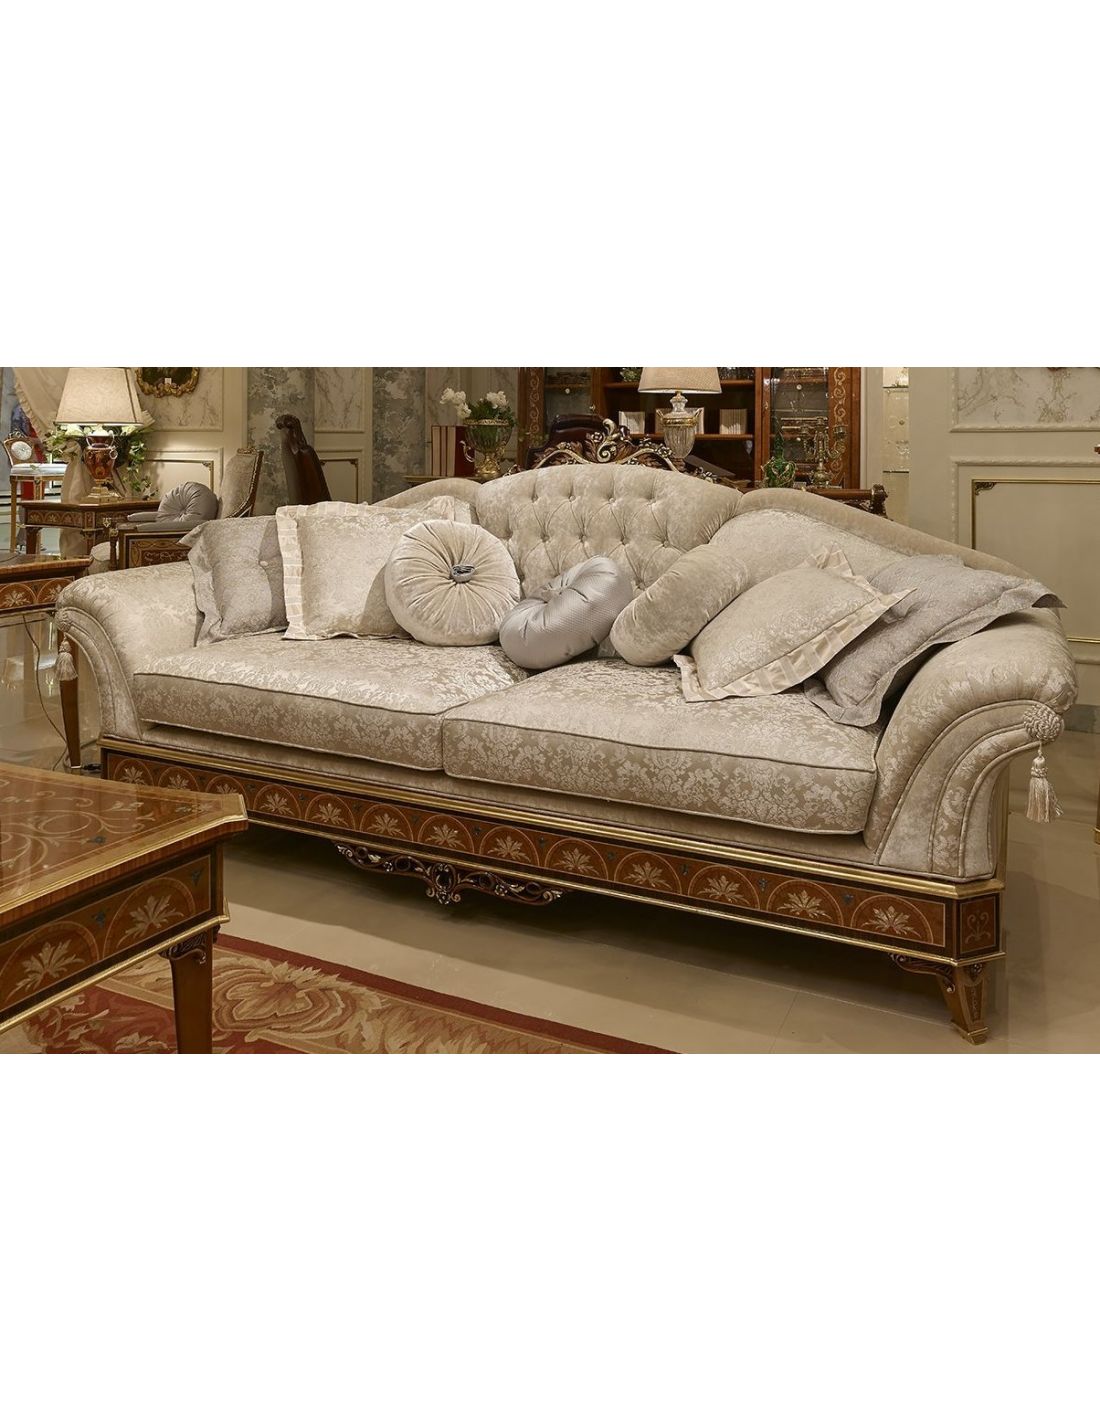 Royal White Sofa from our Venetian modern classic collection 7014